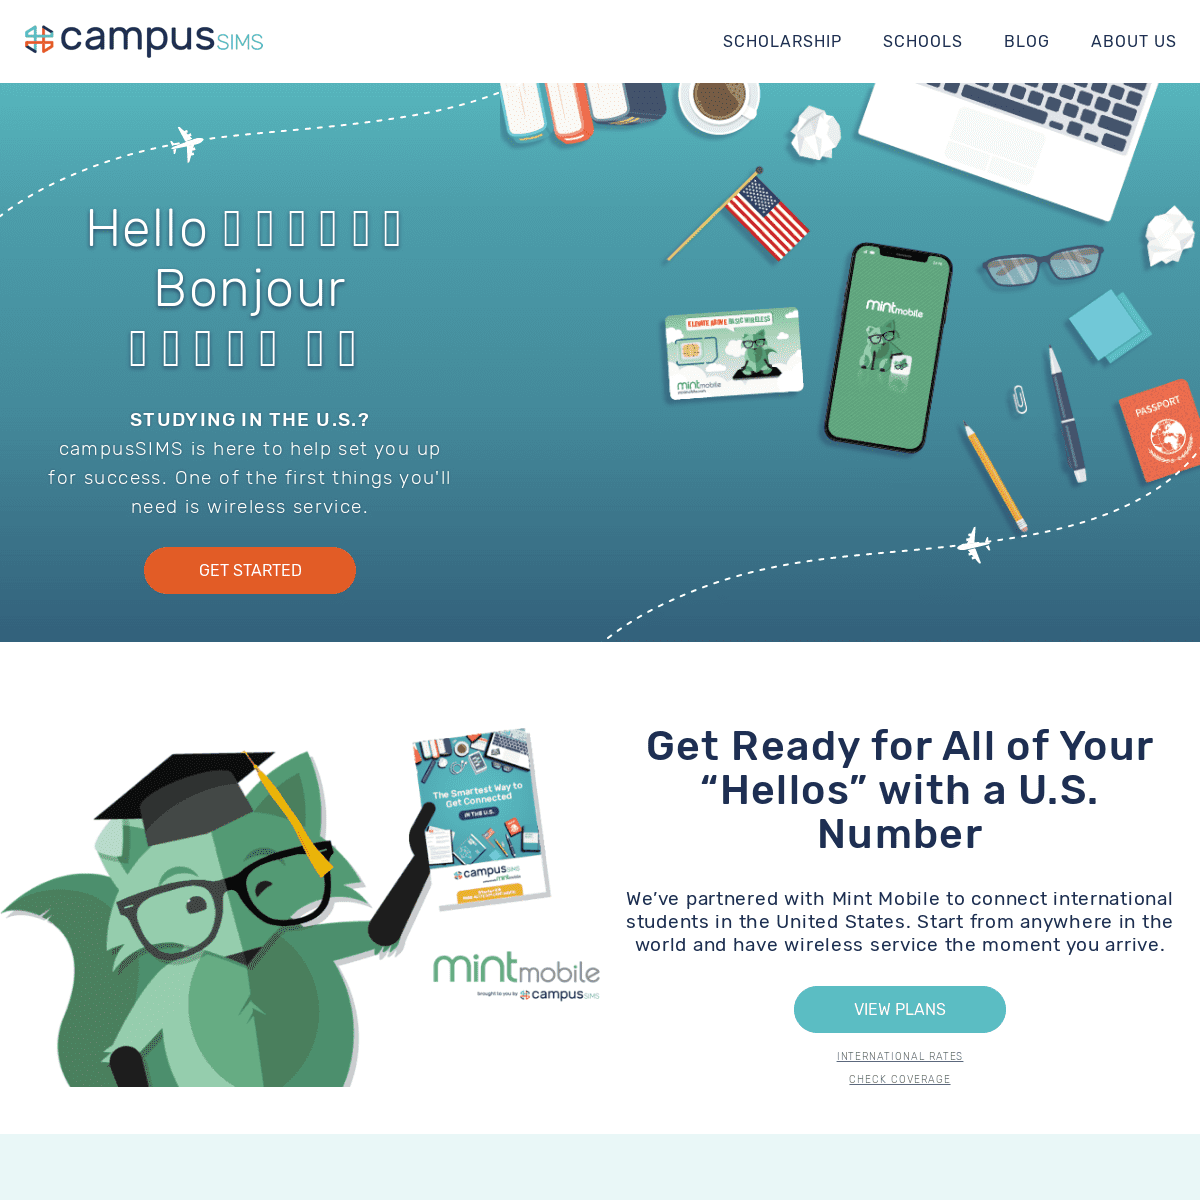 A complete backup of campussims.com